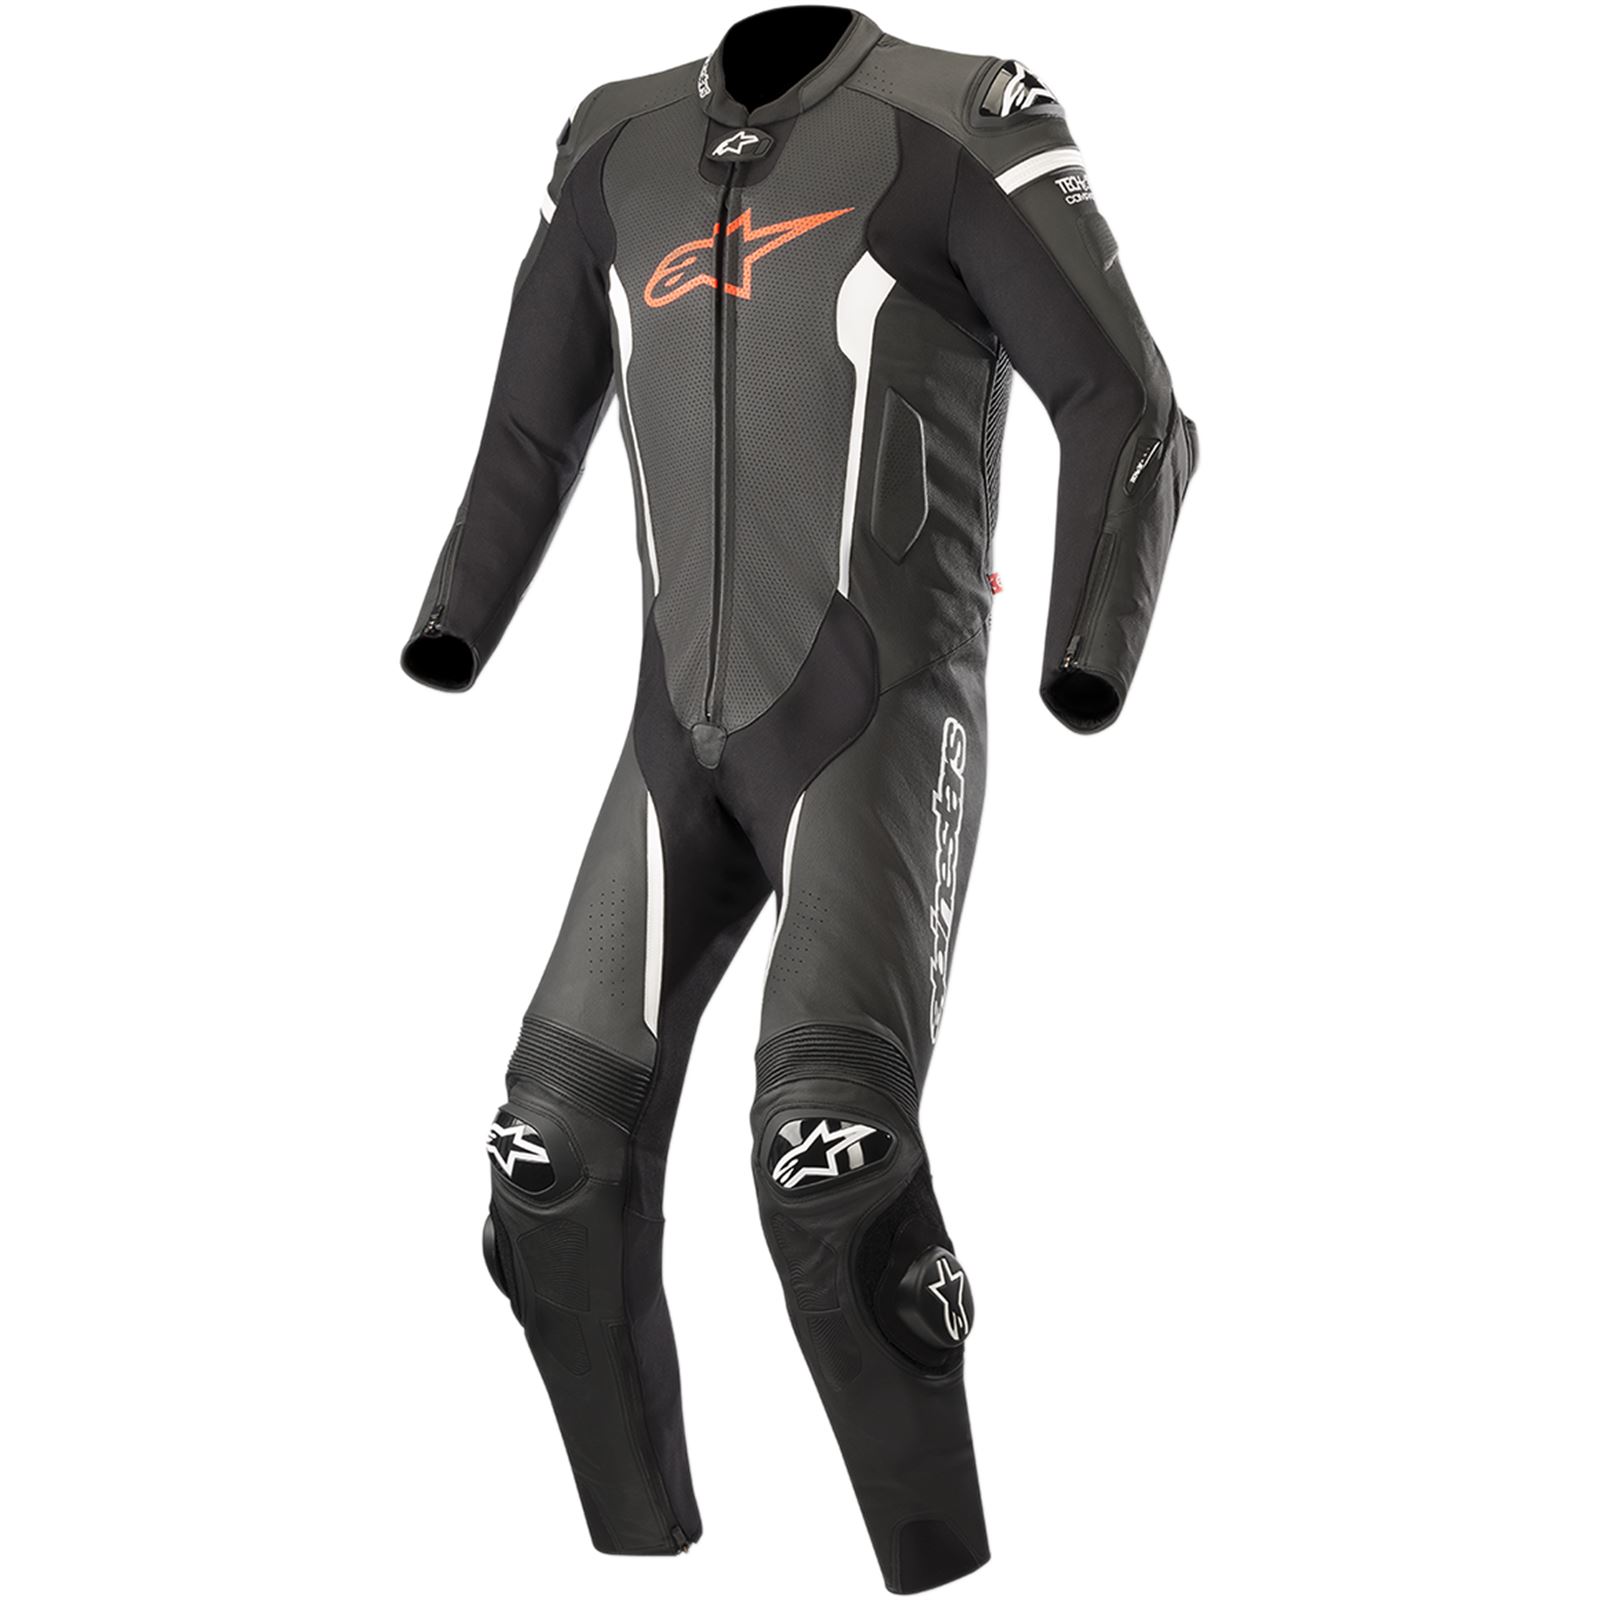 Alpinestars Missile 1-Piece Leather Suit - Black/Red/White - 2X-Large/3X-Large - 44 Pant Size